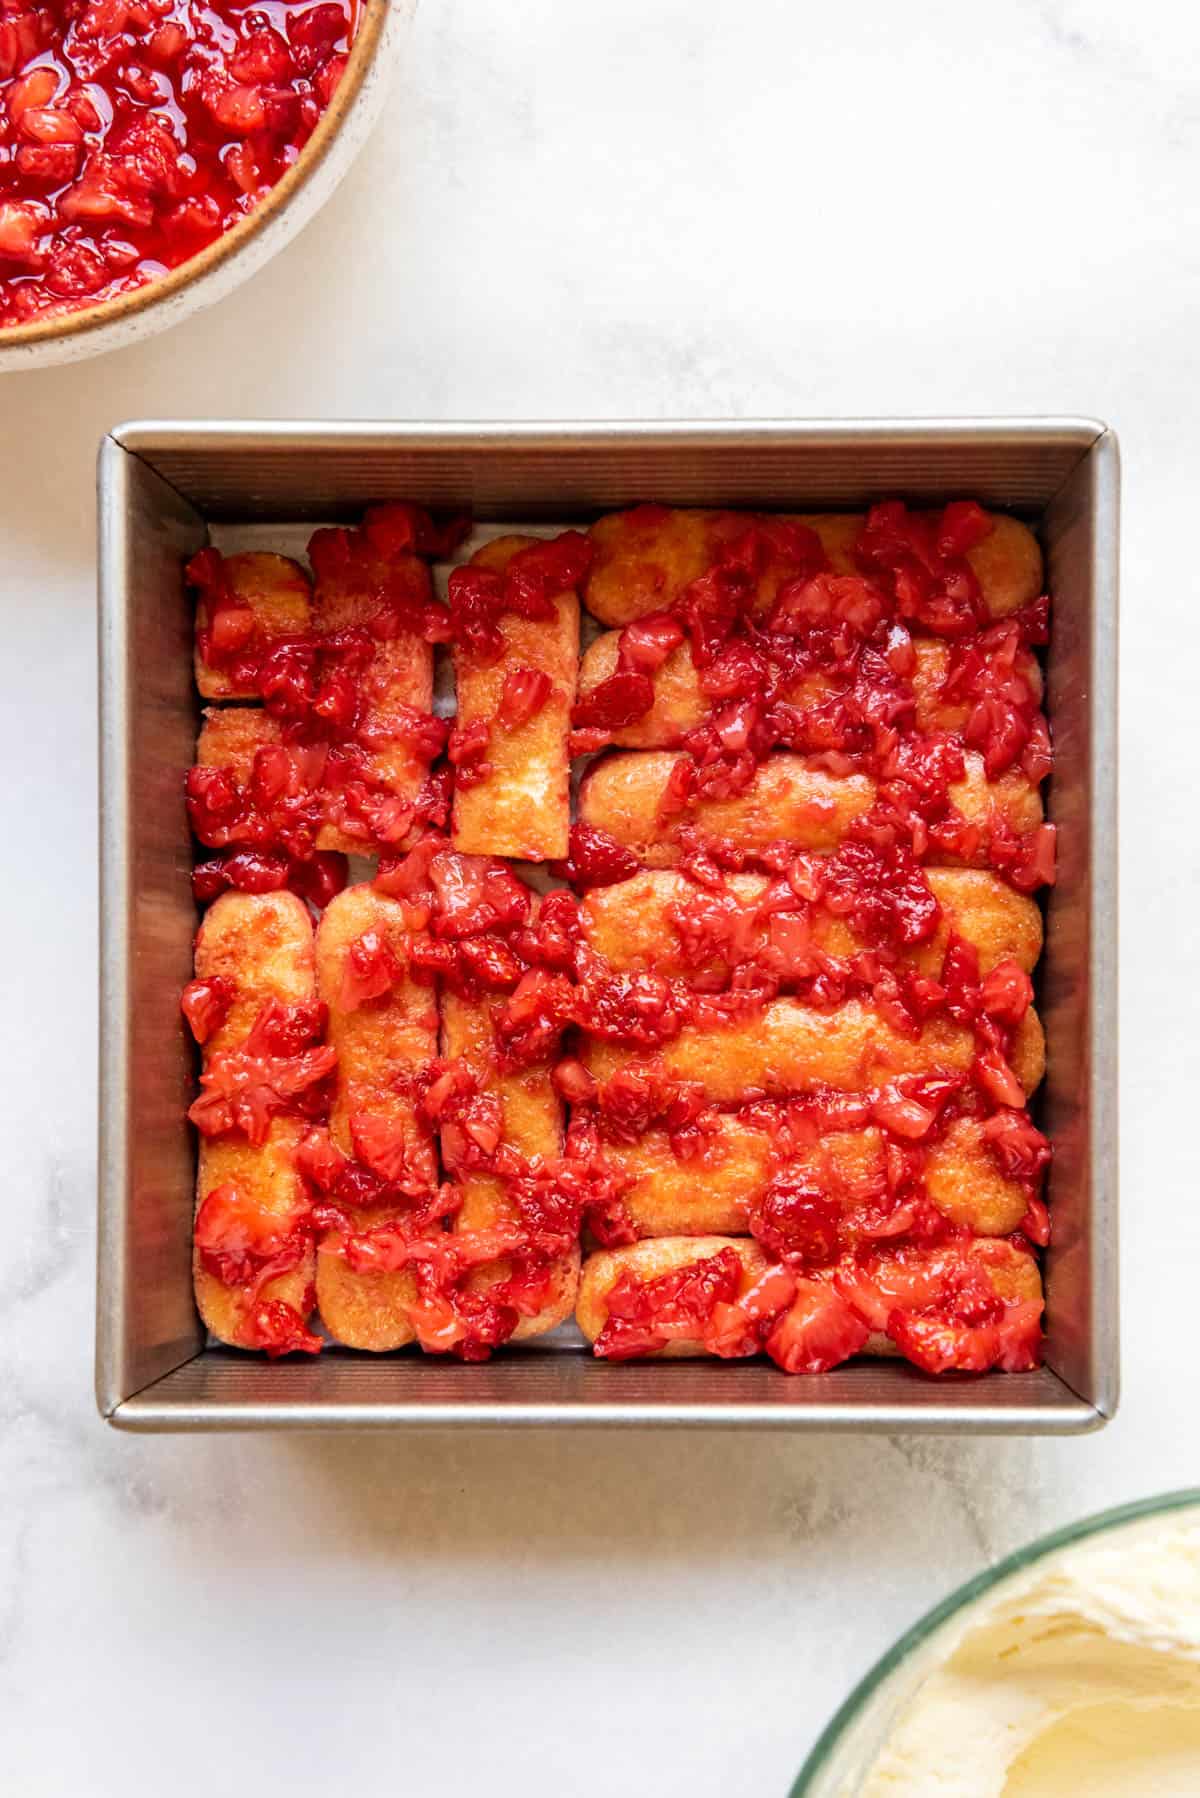 Spreading macerated mashed strawberries over ladyfingers in a pan.